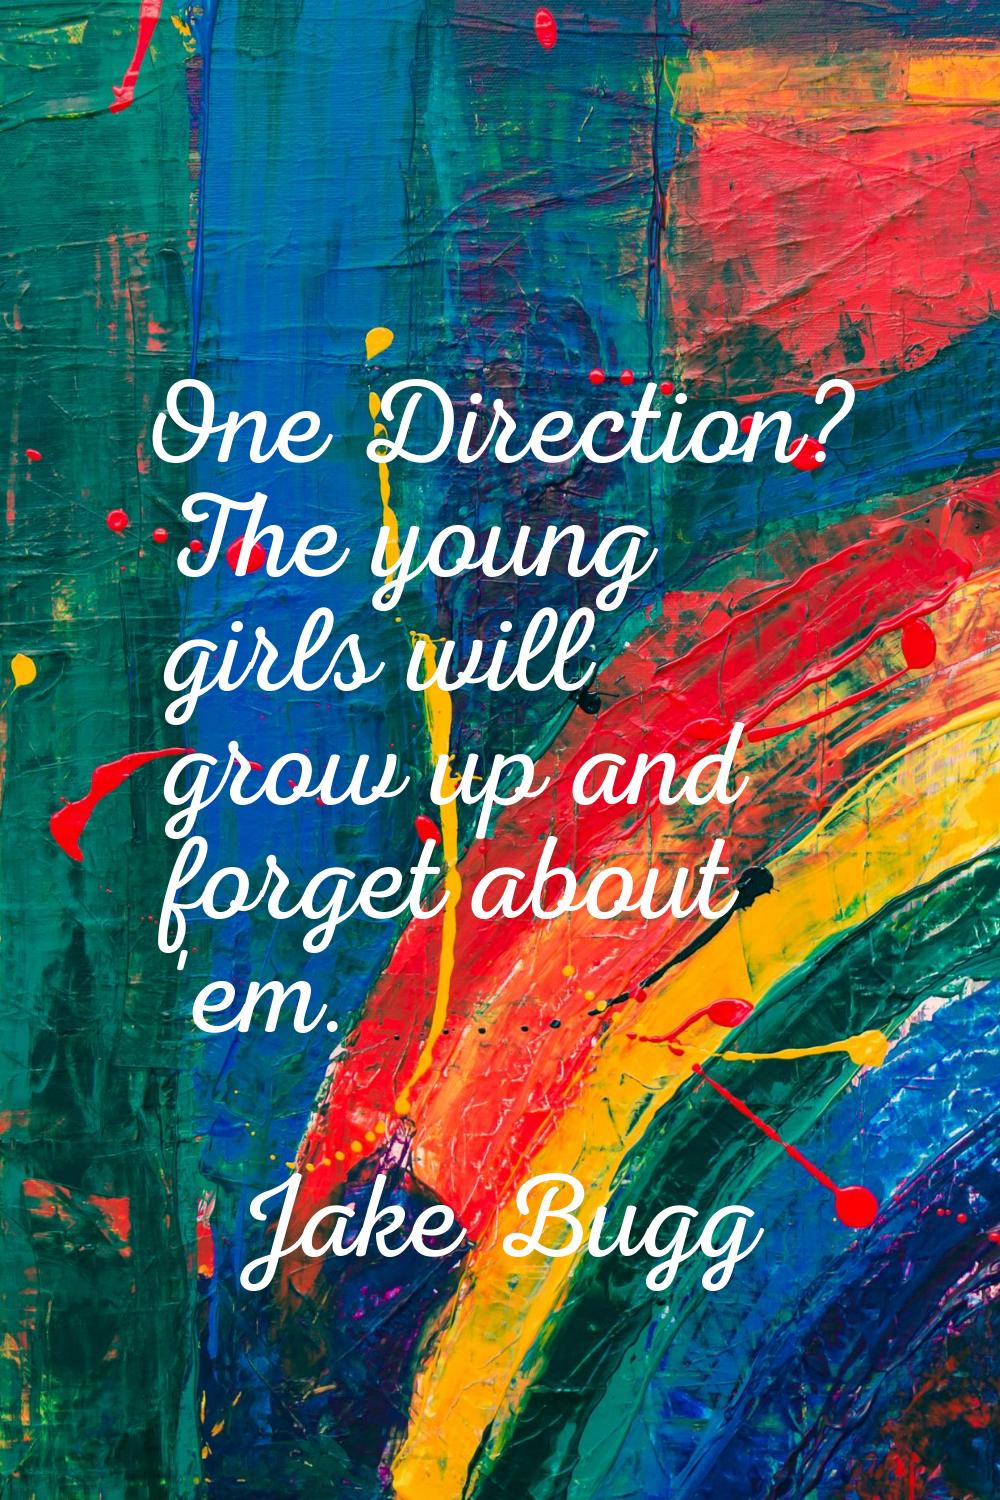 One Direction? The young girls will grow up and forget about 'em.